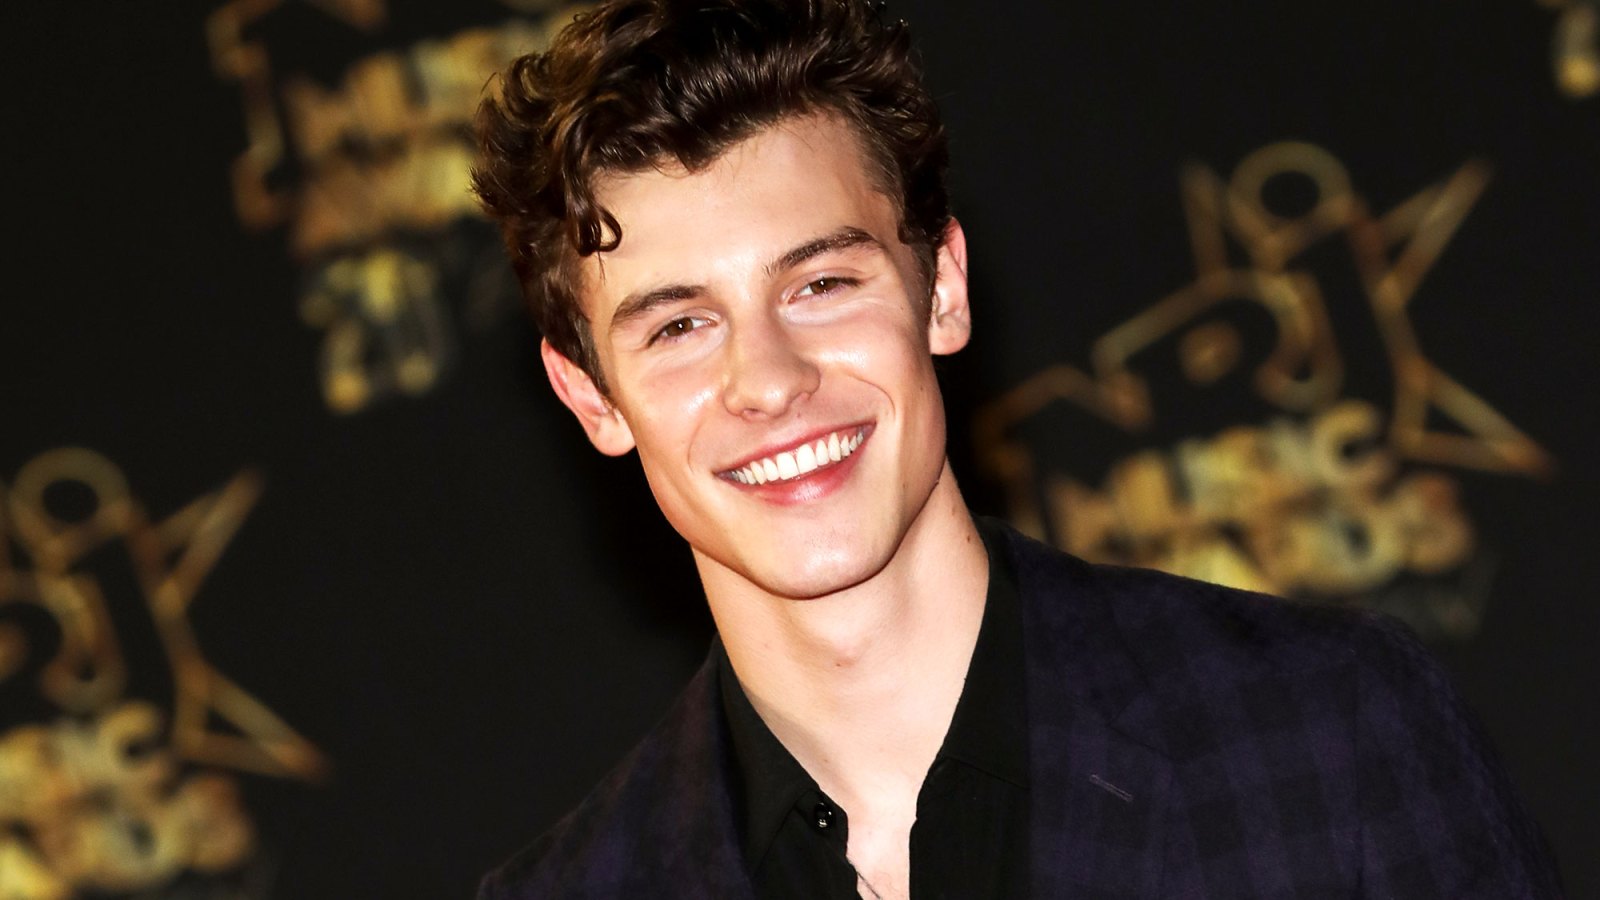 Shawn Mendes' New Gig With SmileDirectClub is All About Boosting Confidence Through an Amazing Smile (Like His)